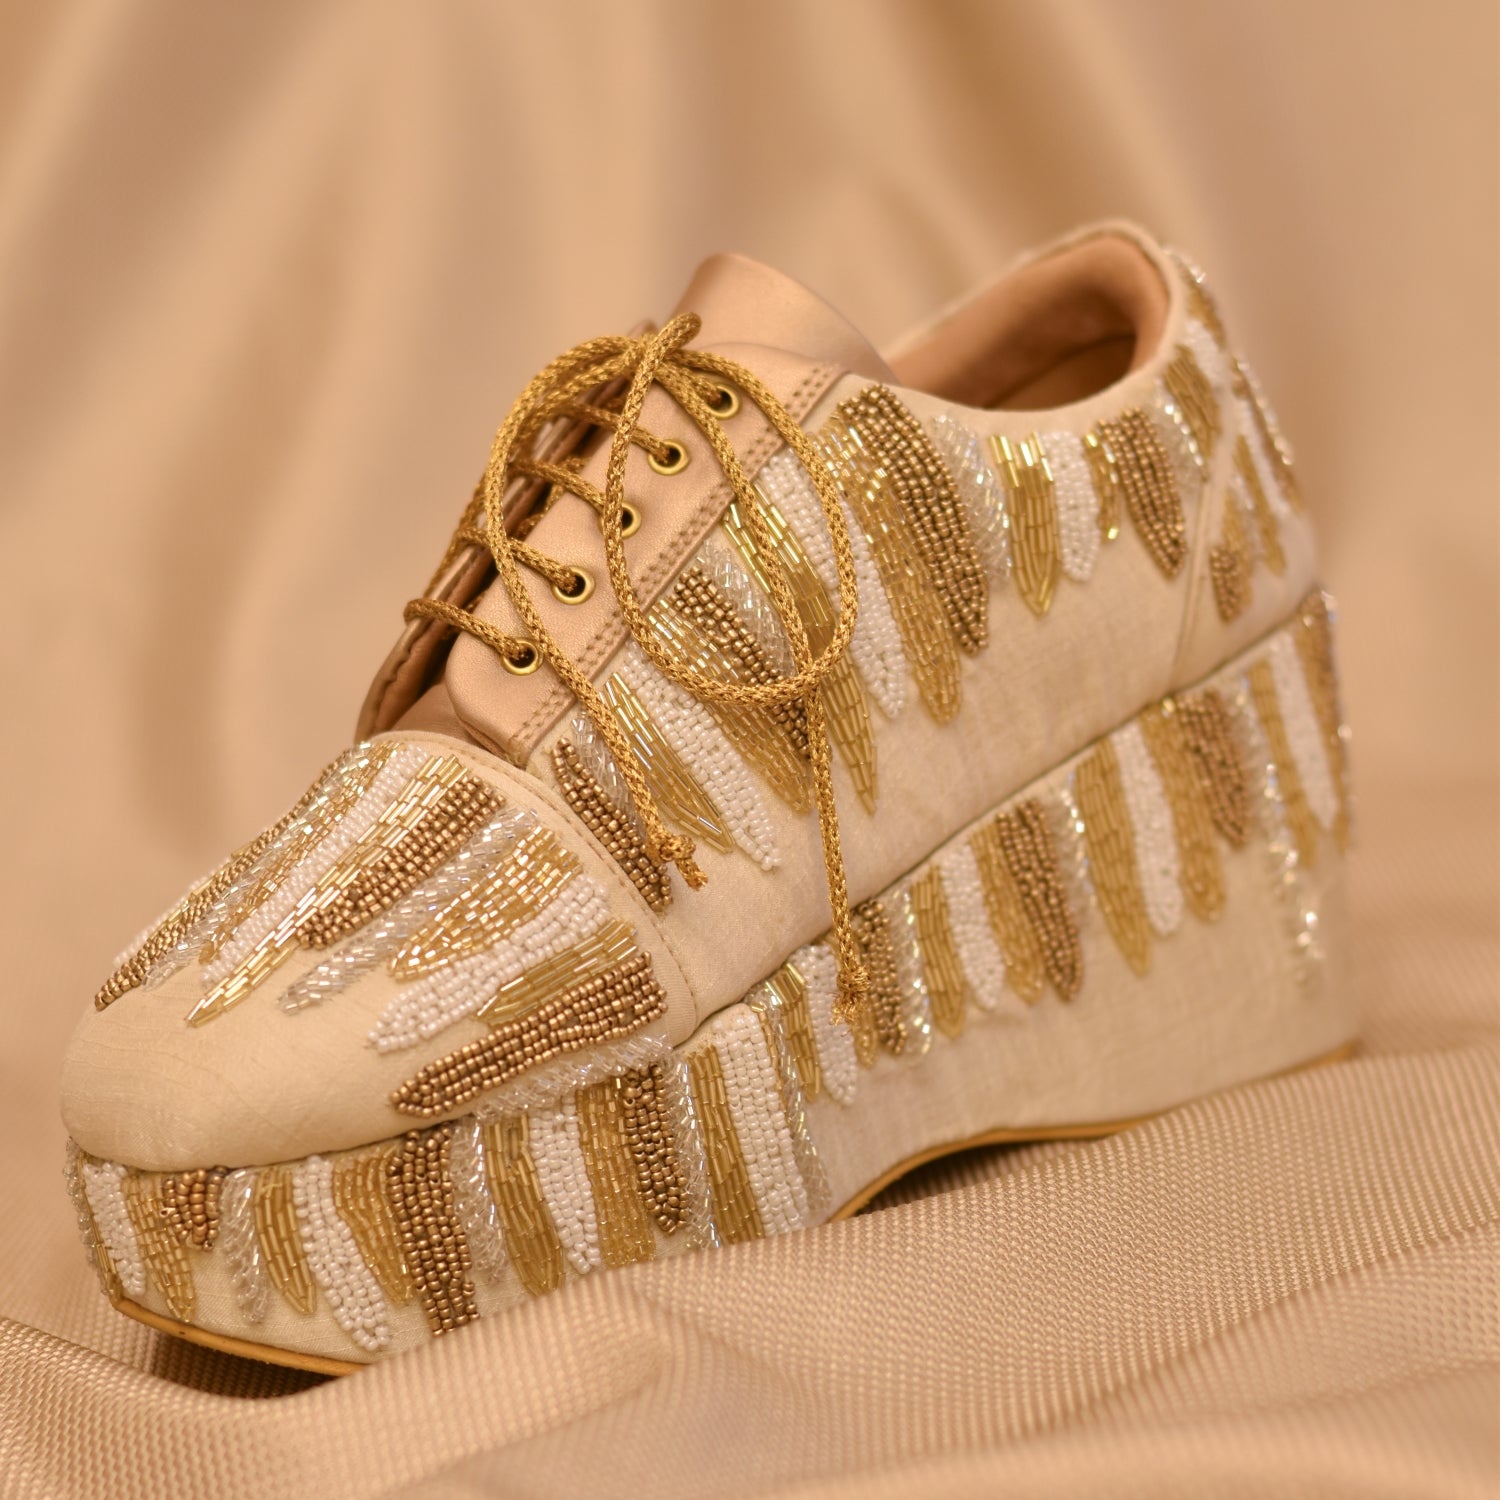 Stylish party sneakers in golden colour